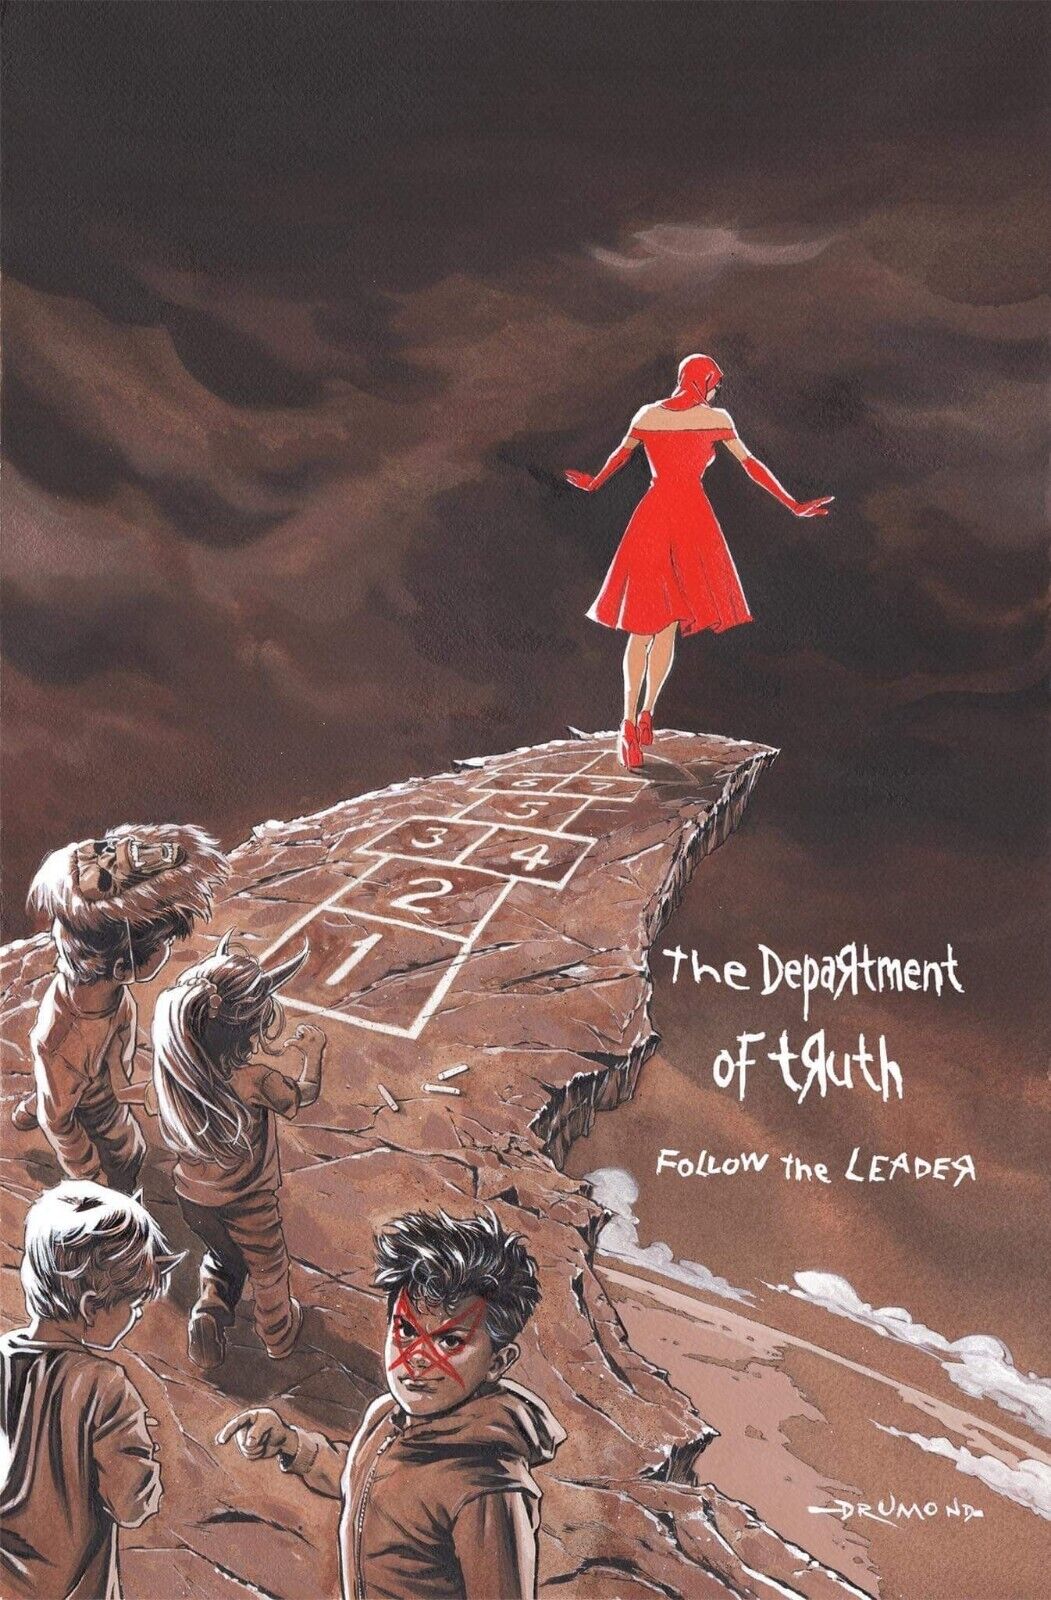 The Department of Truth #13 - Drumond - Korn Follow the Leader Variant - Ltd 500